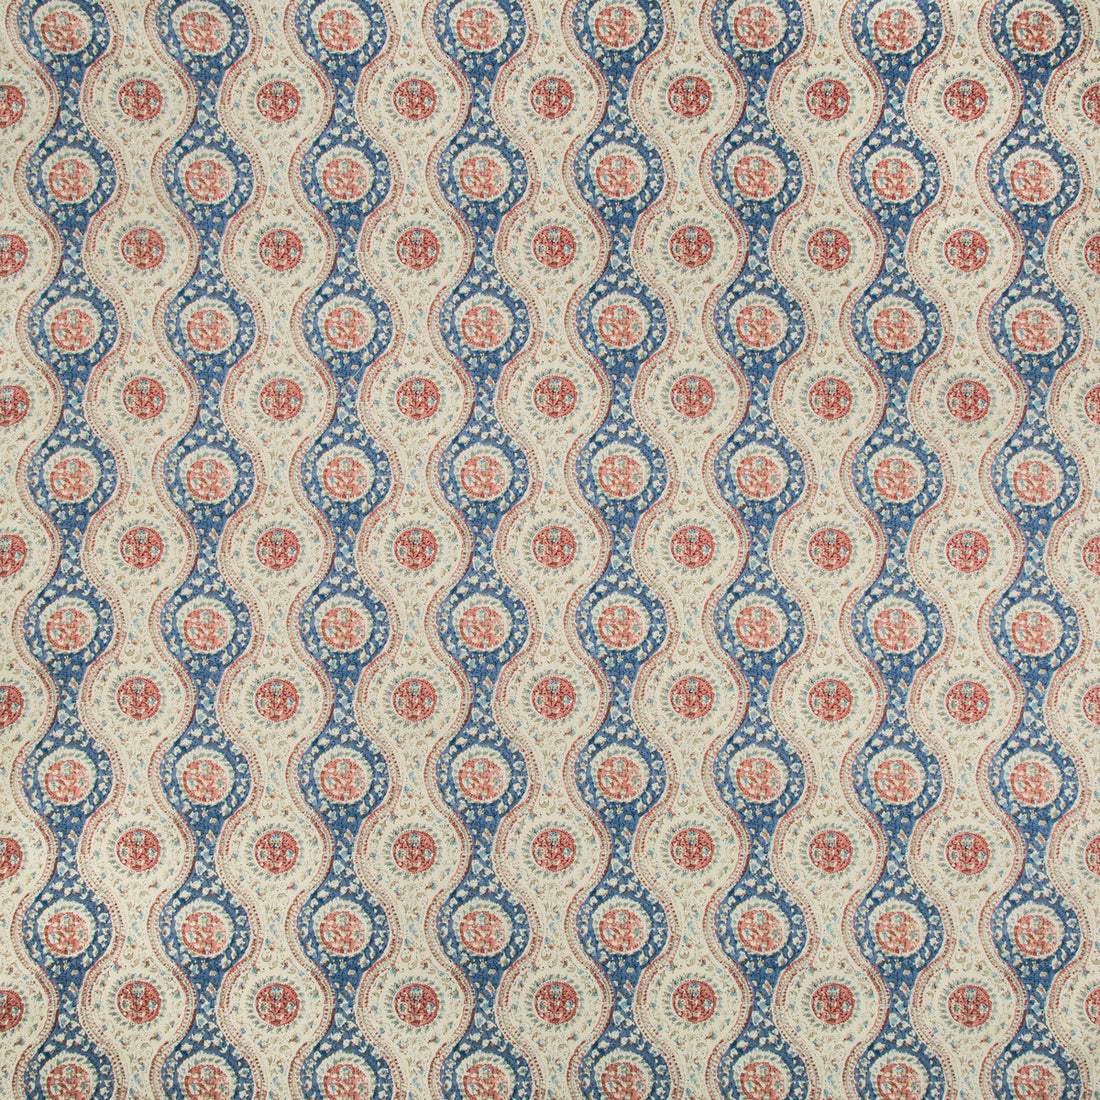 Nadari Print fabric in blue/red color - pattern 8019129.519.0 - by Brunschwig &amp; Fils in the Folio Francais collection